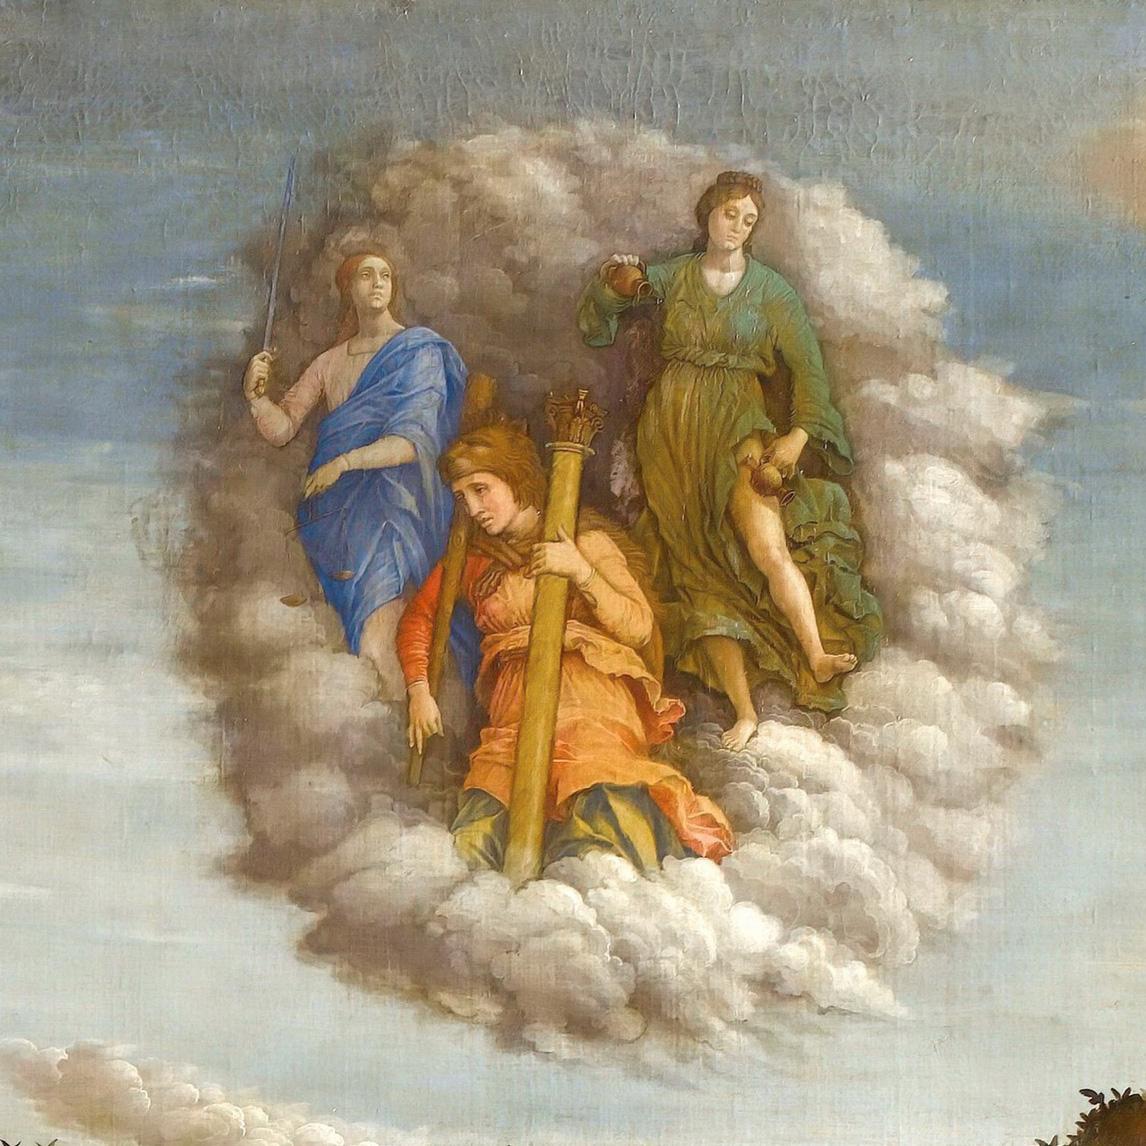 Justice, Temperance, and Forbearance wait in the clouds to return to the Garden of Virtue in this detail of "Minerva Expelling the Vices from the Garden of Virtue." (Public Domain)